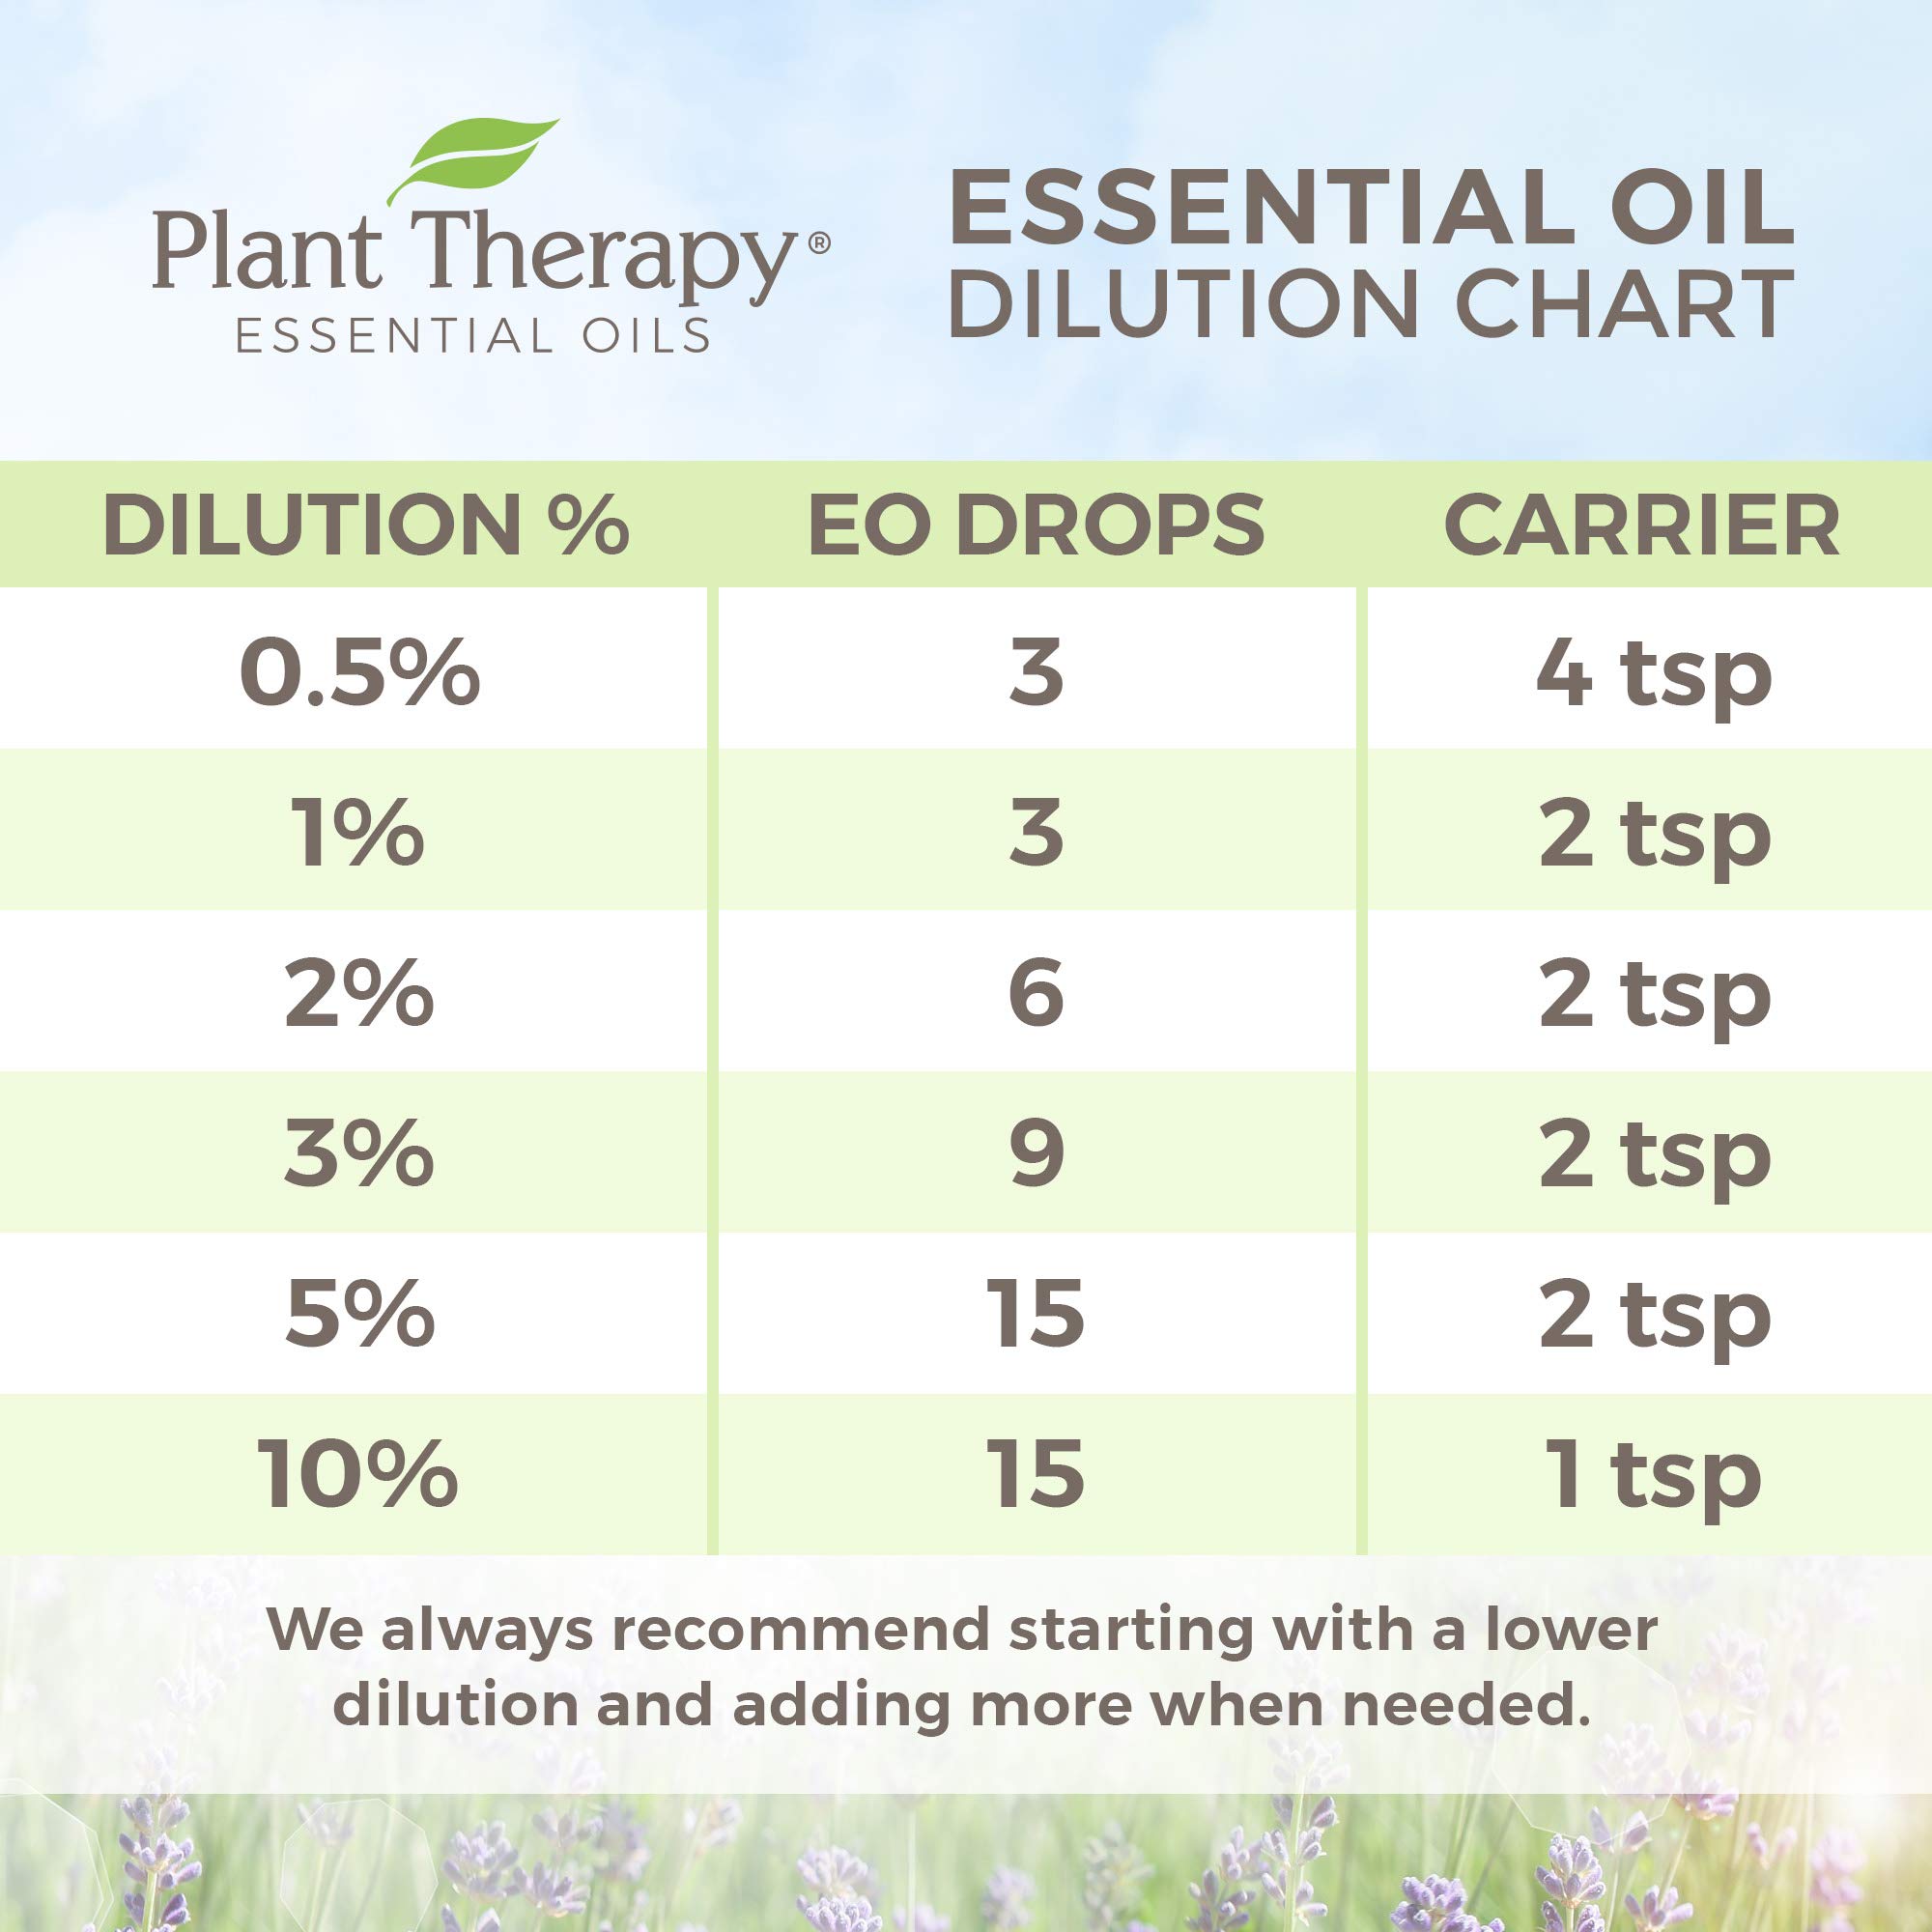 Plant Therapy Balance Essential Oil Blend 10 mL (1/3 oz) 100% Pure, Undiluted, Therapeutic Grade